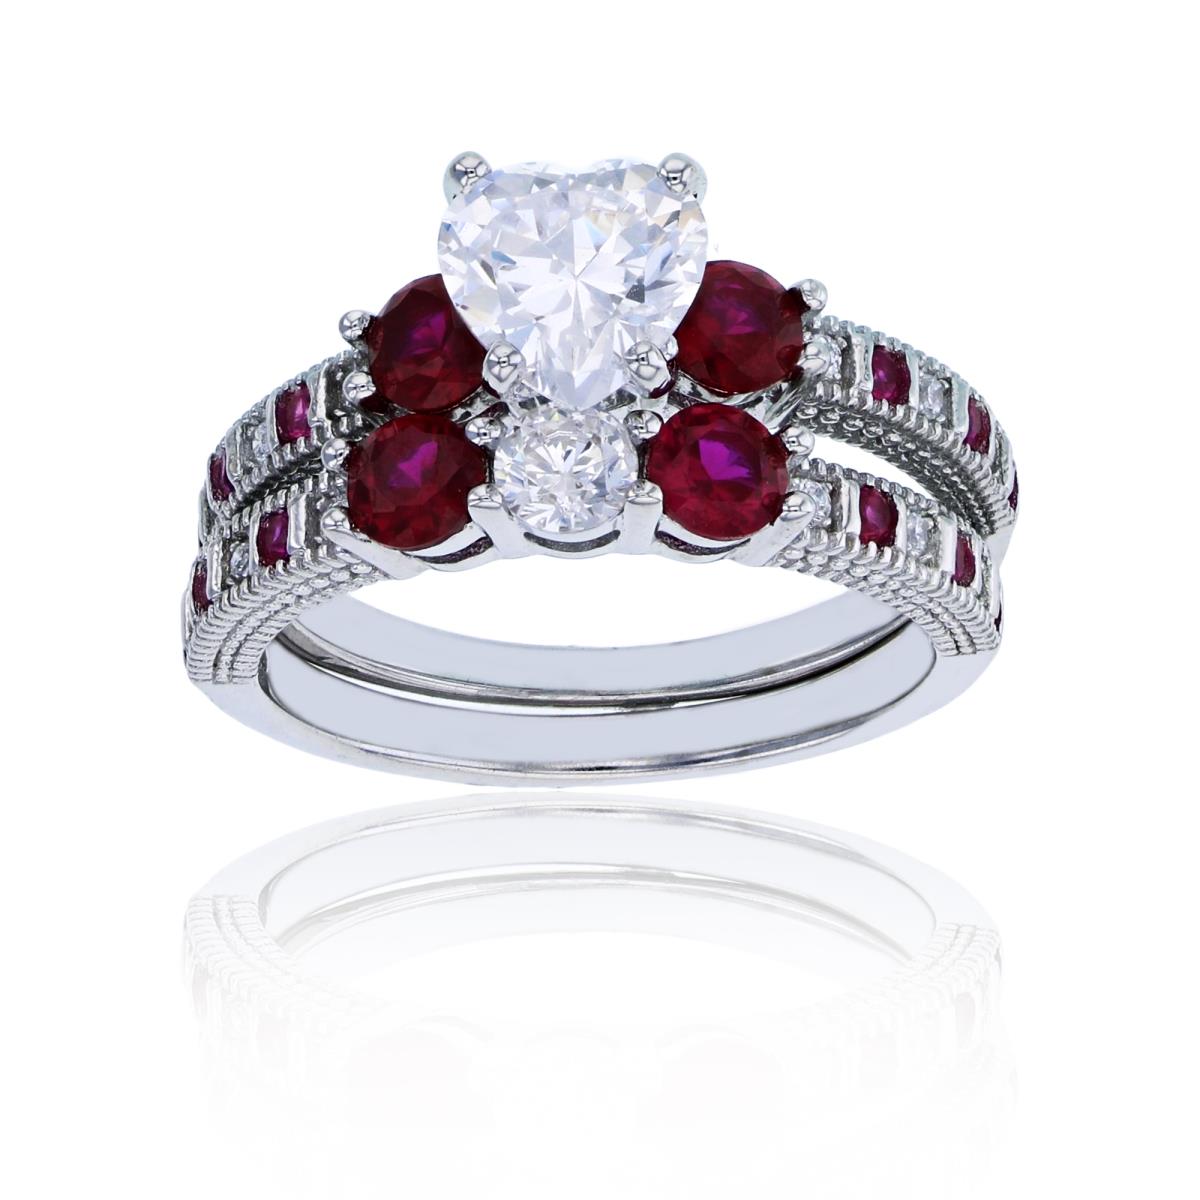 Sterling Silver Rhodium 7mm White Heart Cut with Alternating Ruby & White Rd CZ Duo Ring